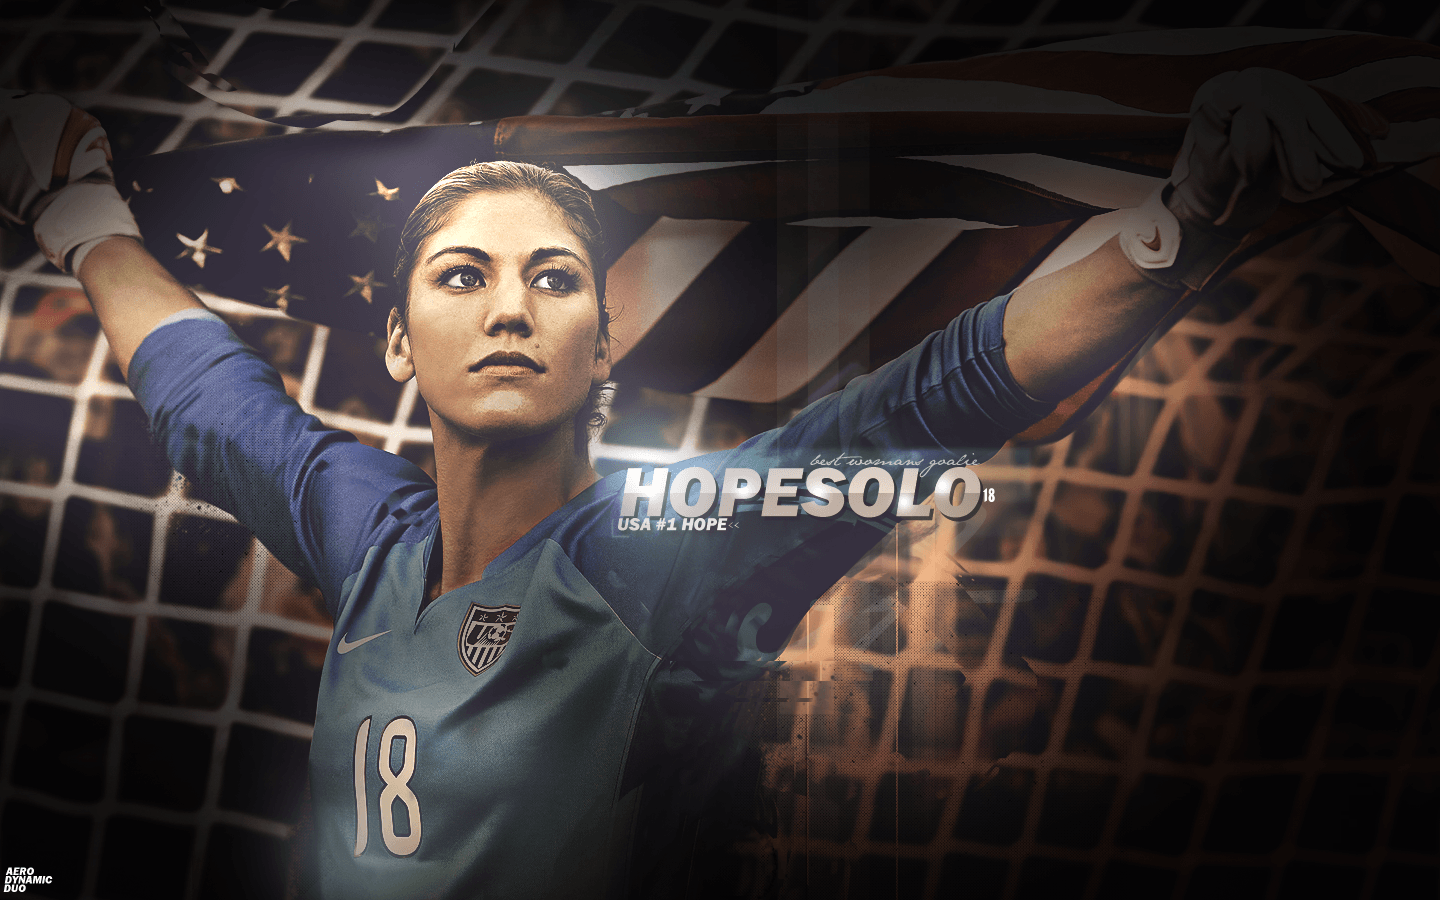 Hope Solo Wallpaper HD With Flag. Fitness. Hope Solo, Football